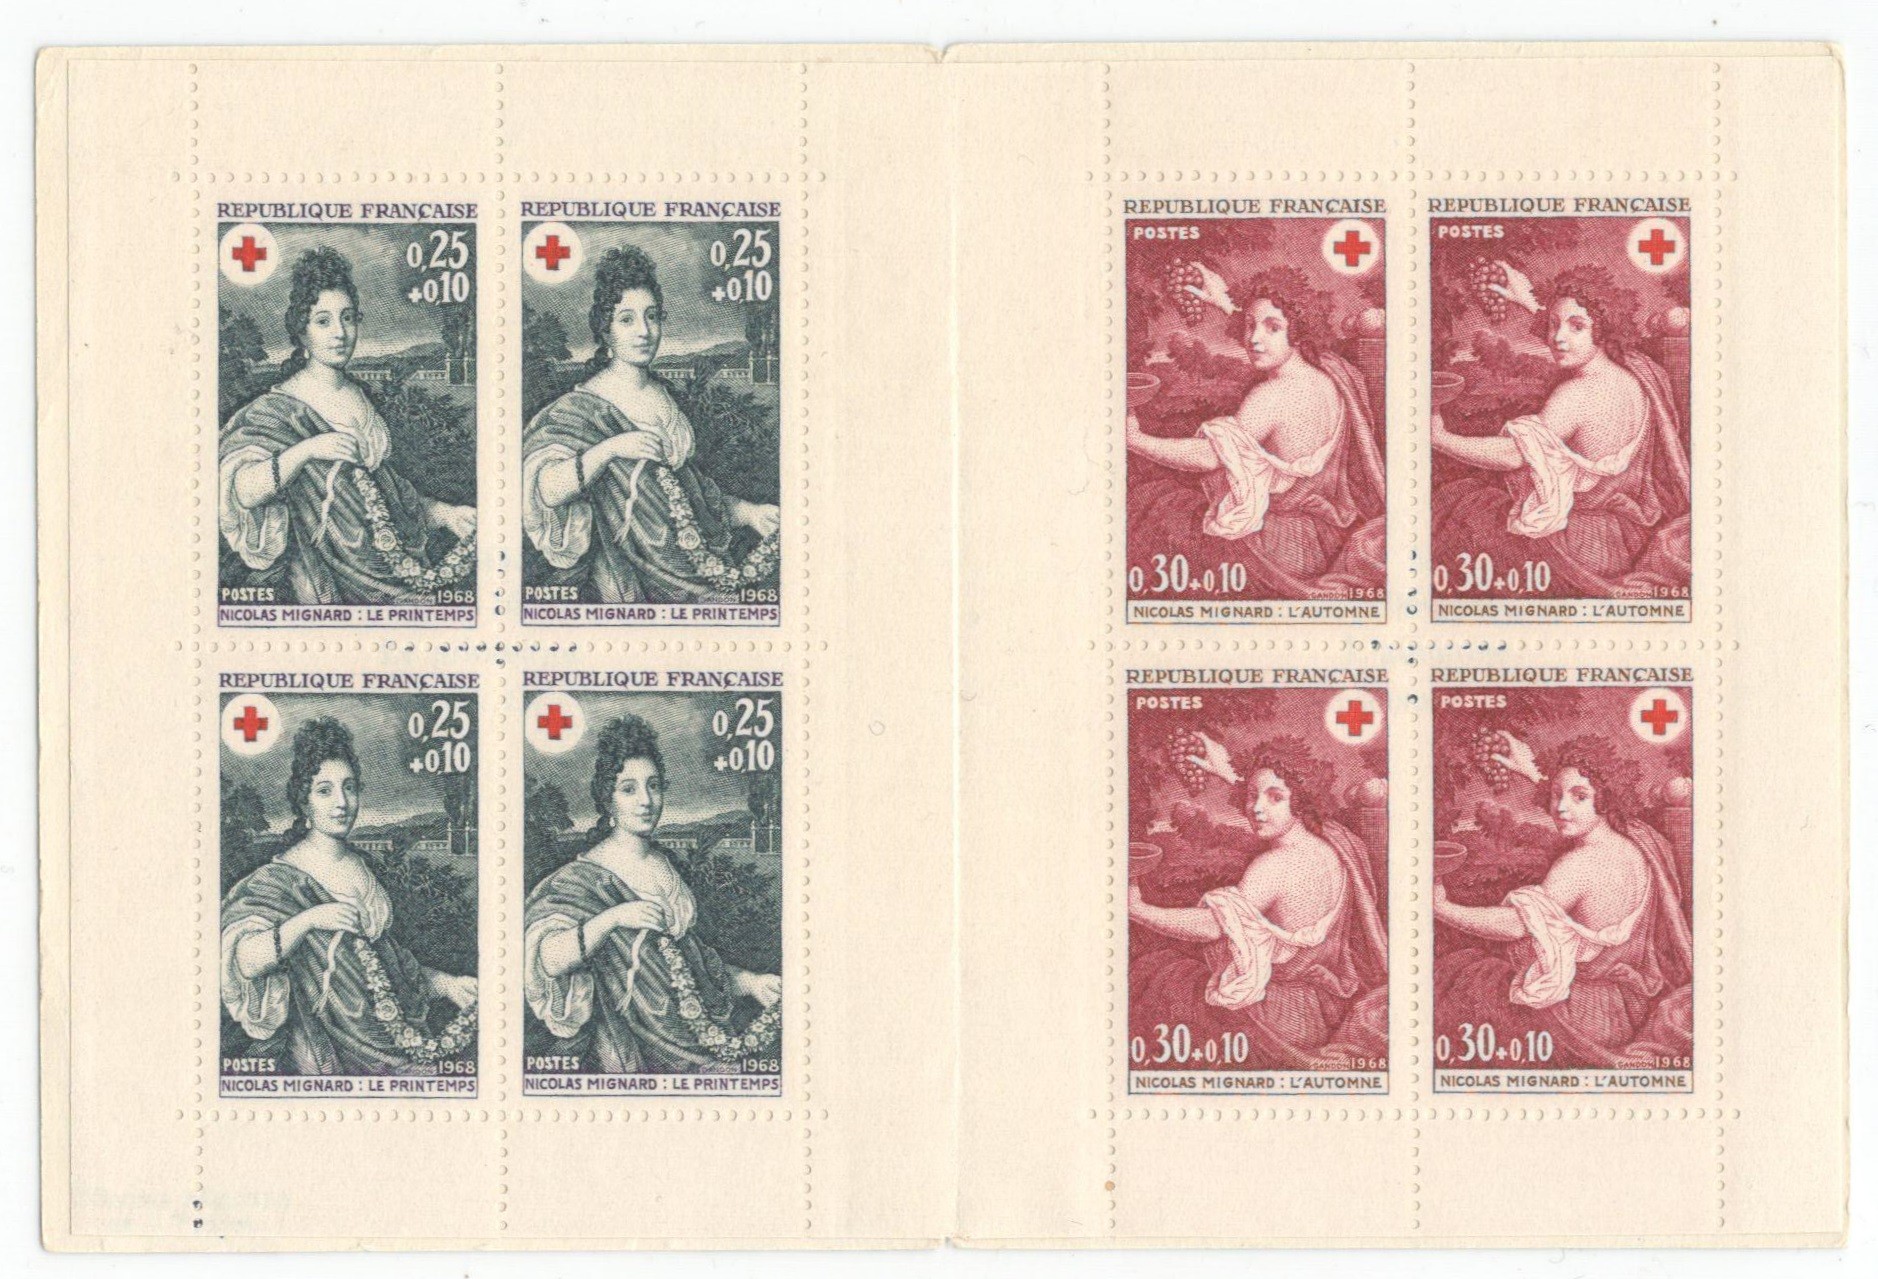 FRENCH RED CROSS STAMP BOOKLETS 1964 1965 1966 1968 1969 & FRENCH RED CROSS CHARITY STAMPS - Image 8 of 11